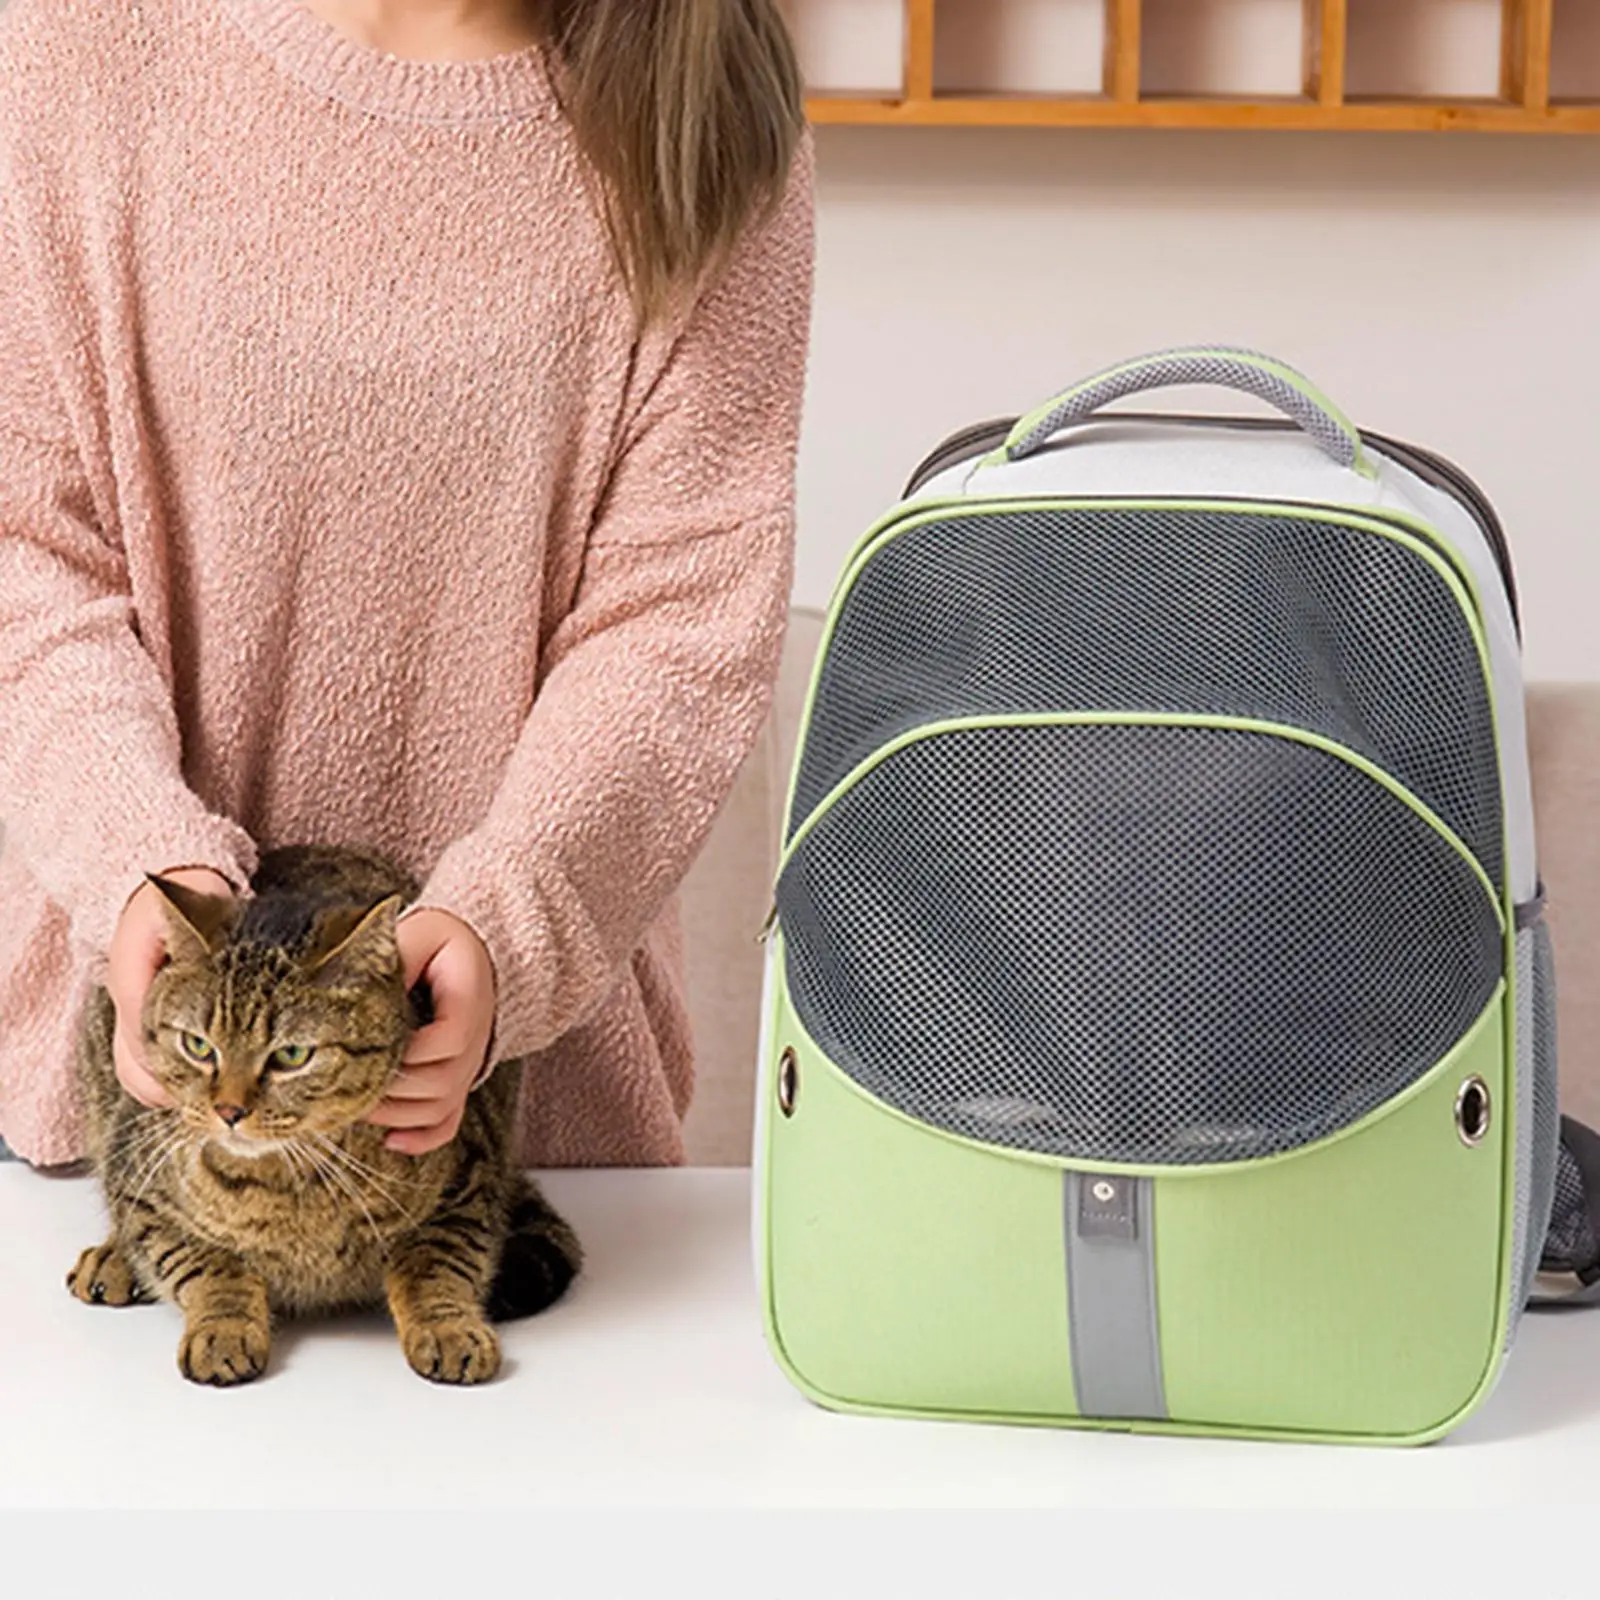 Collapsible Pet Carrier Travel Transport Bag Cat Dog Carrier Breathable Cat Backpack Expandable for Travel Small Dog Kitten